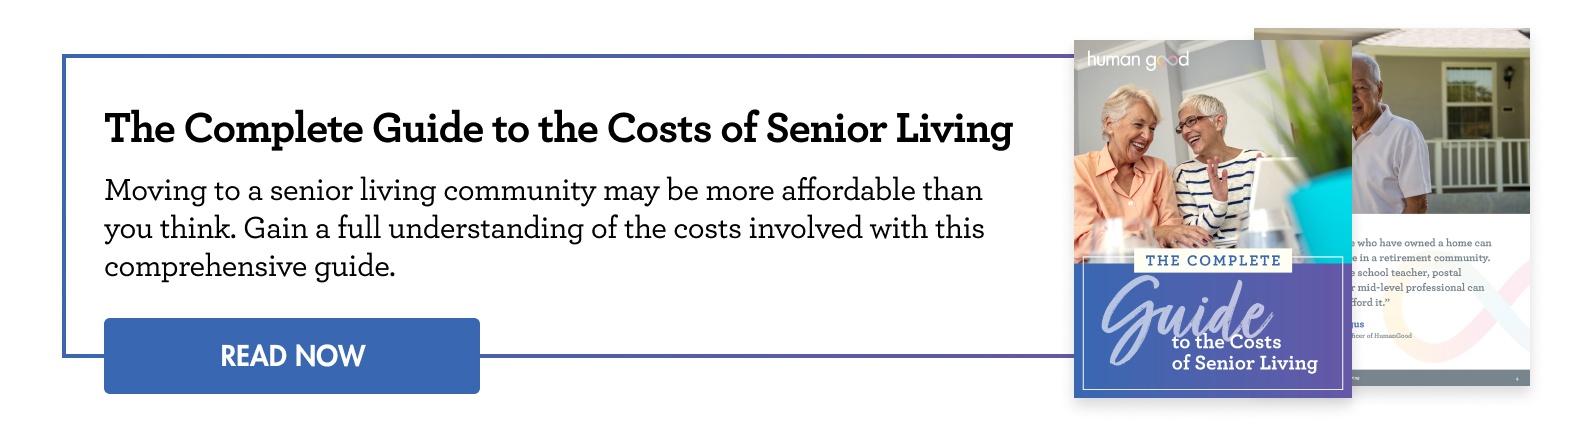 call to action to download our free "Complete Guide to the Costs of Senior Living" guide